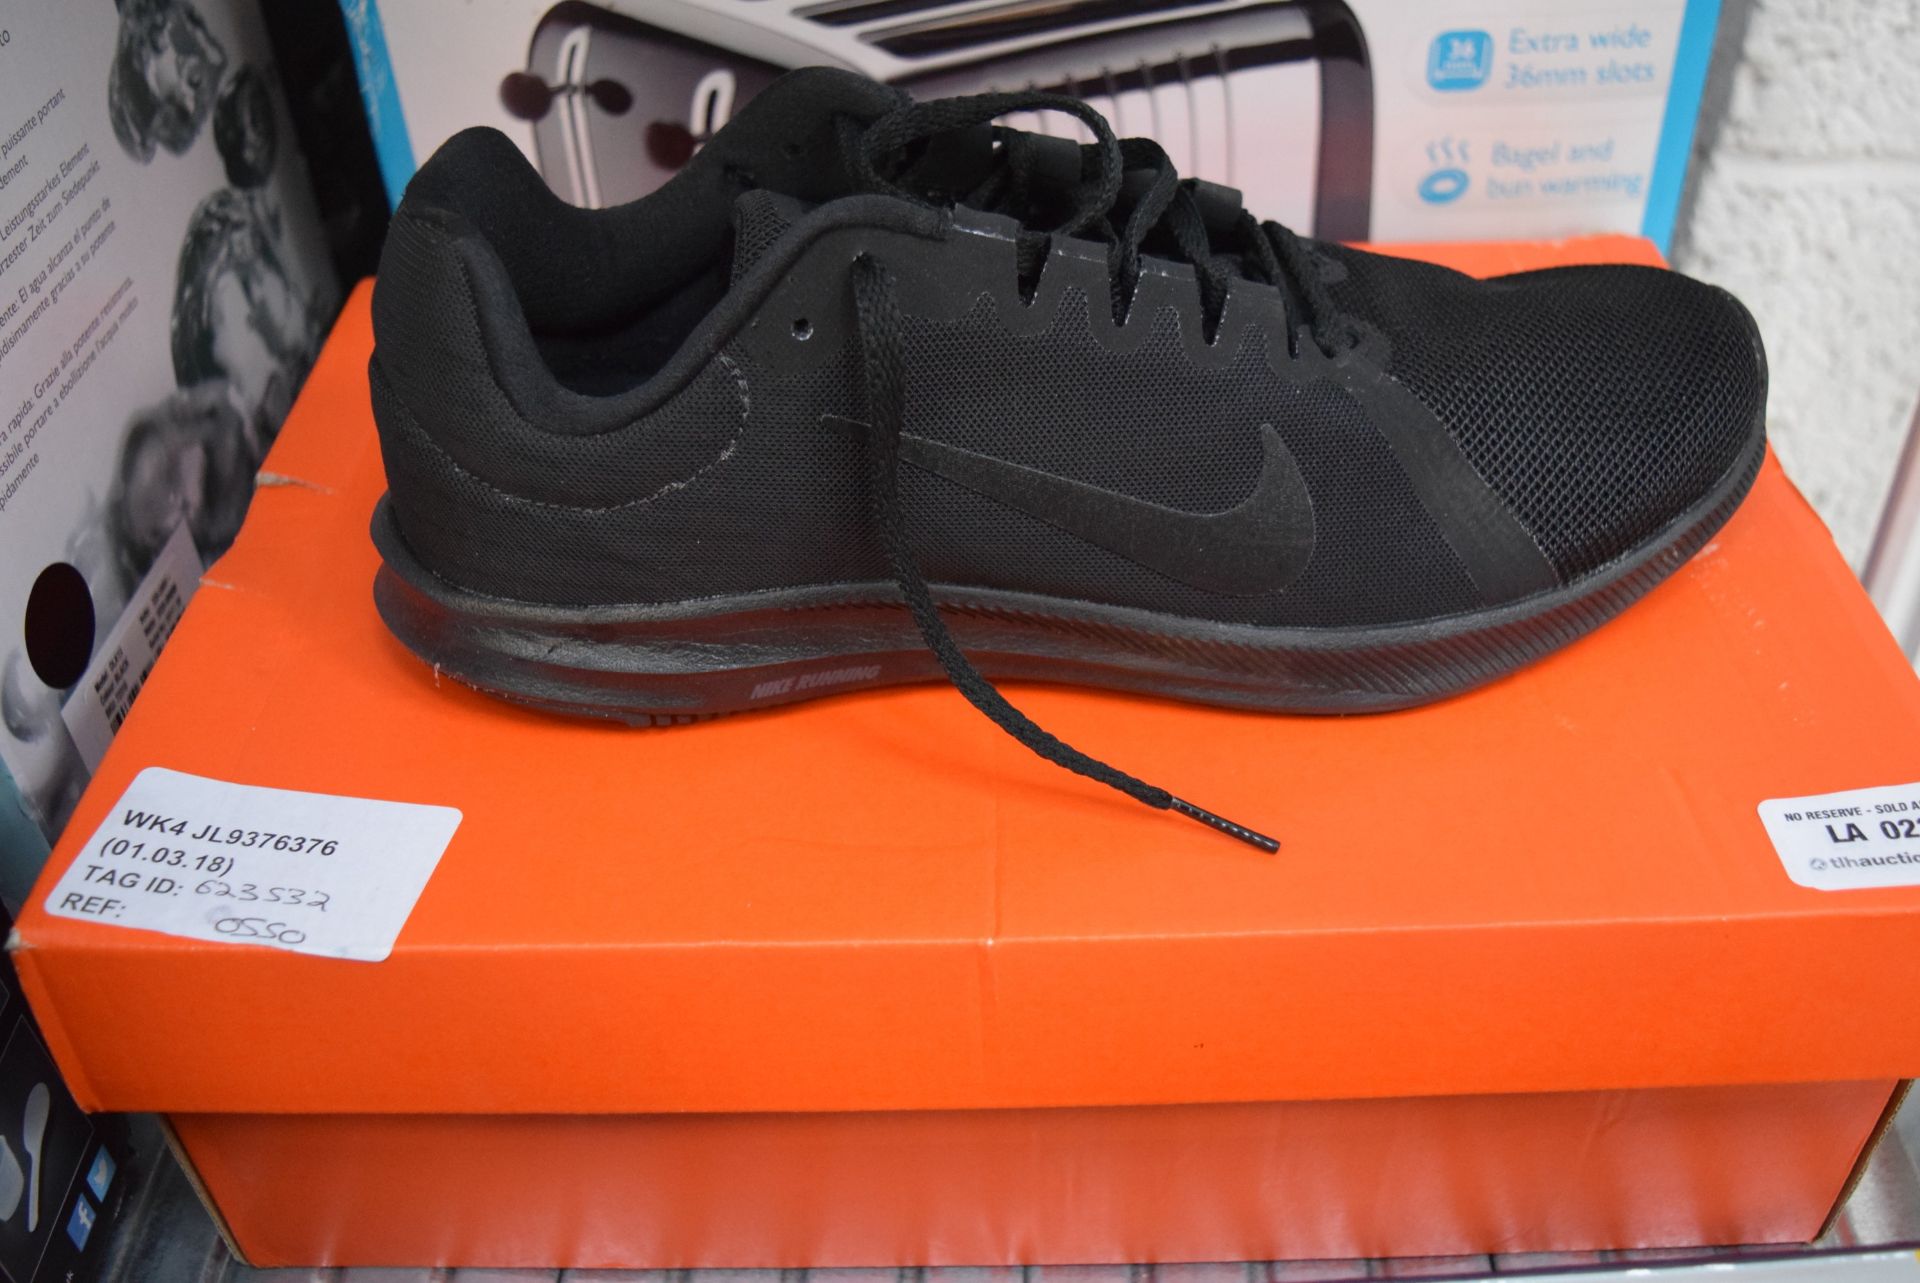 1 x BOXED PAIR LADIES NIKE RUNNING SHOES SIZE 7 RRP £55 01.03.18 623562 *PLEASE NOTE THAT THE BID